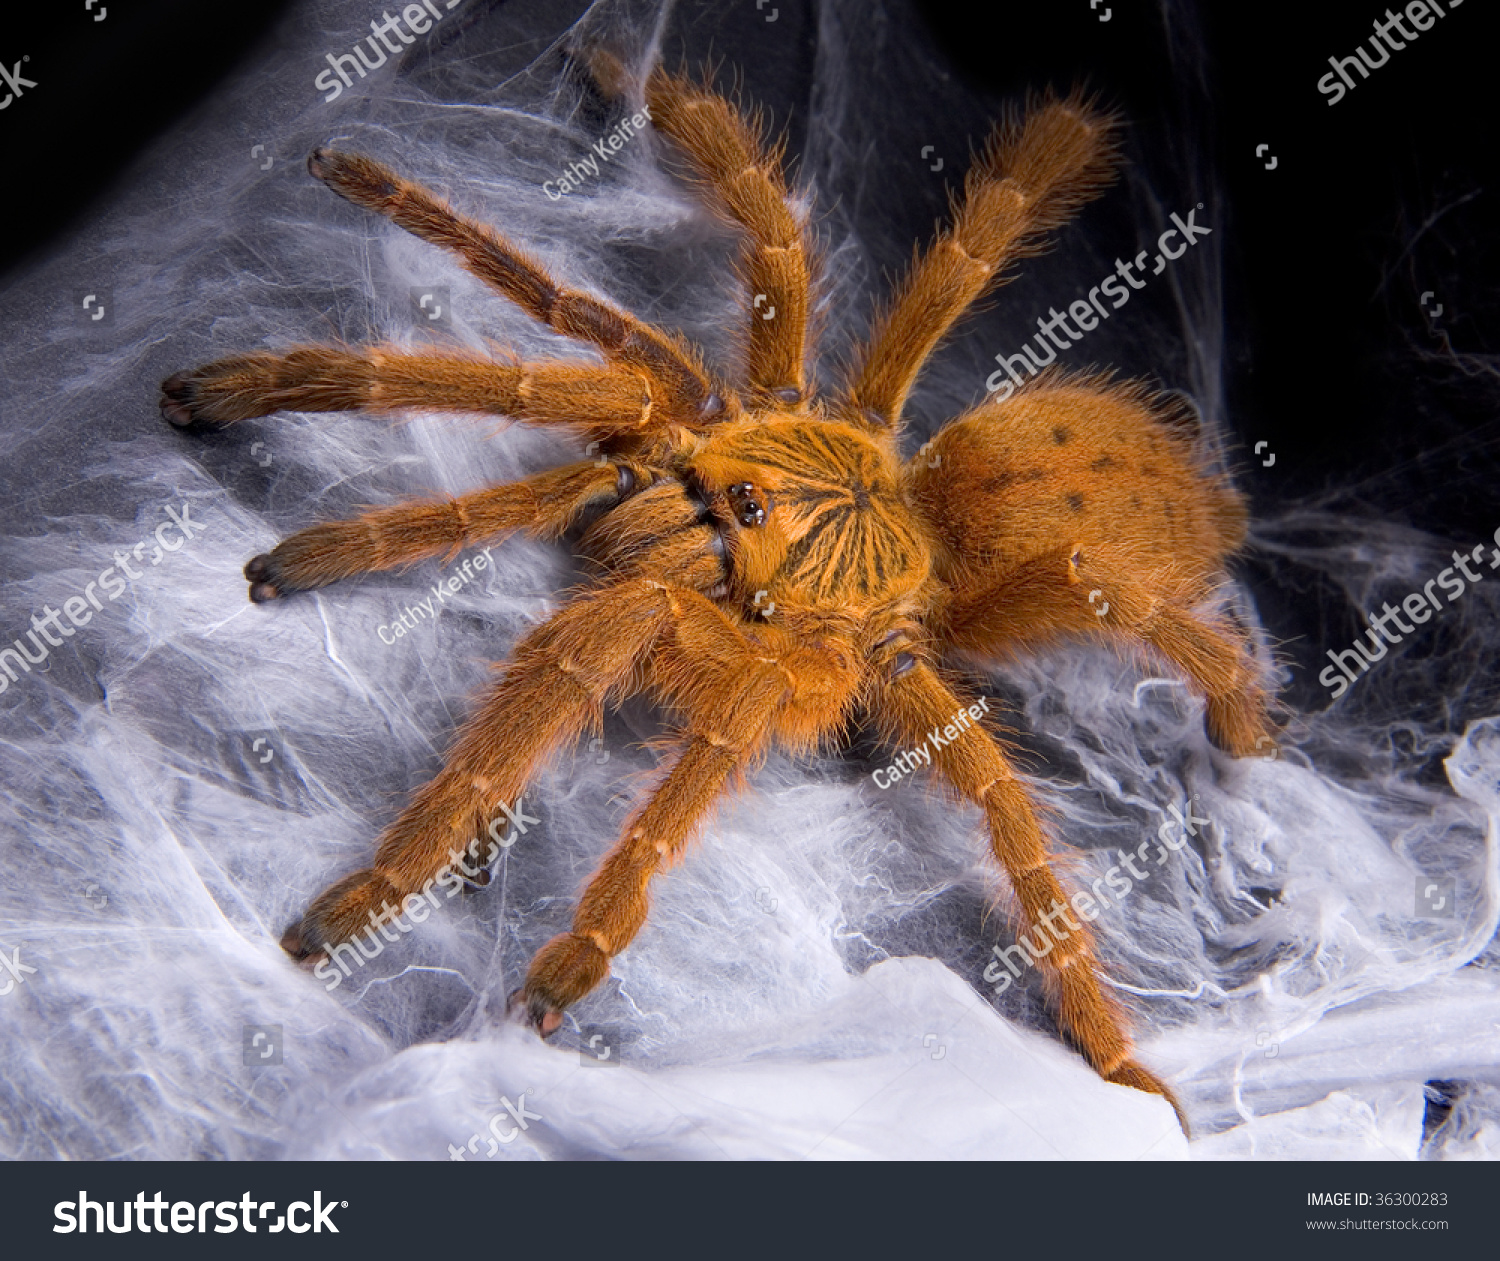 An Obt Tarantula Is Sitting On Top Of It'S Web. Stock Photo 36300283 ...